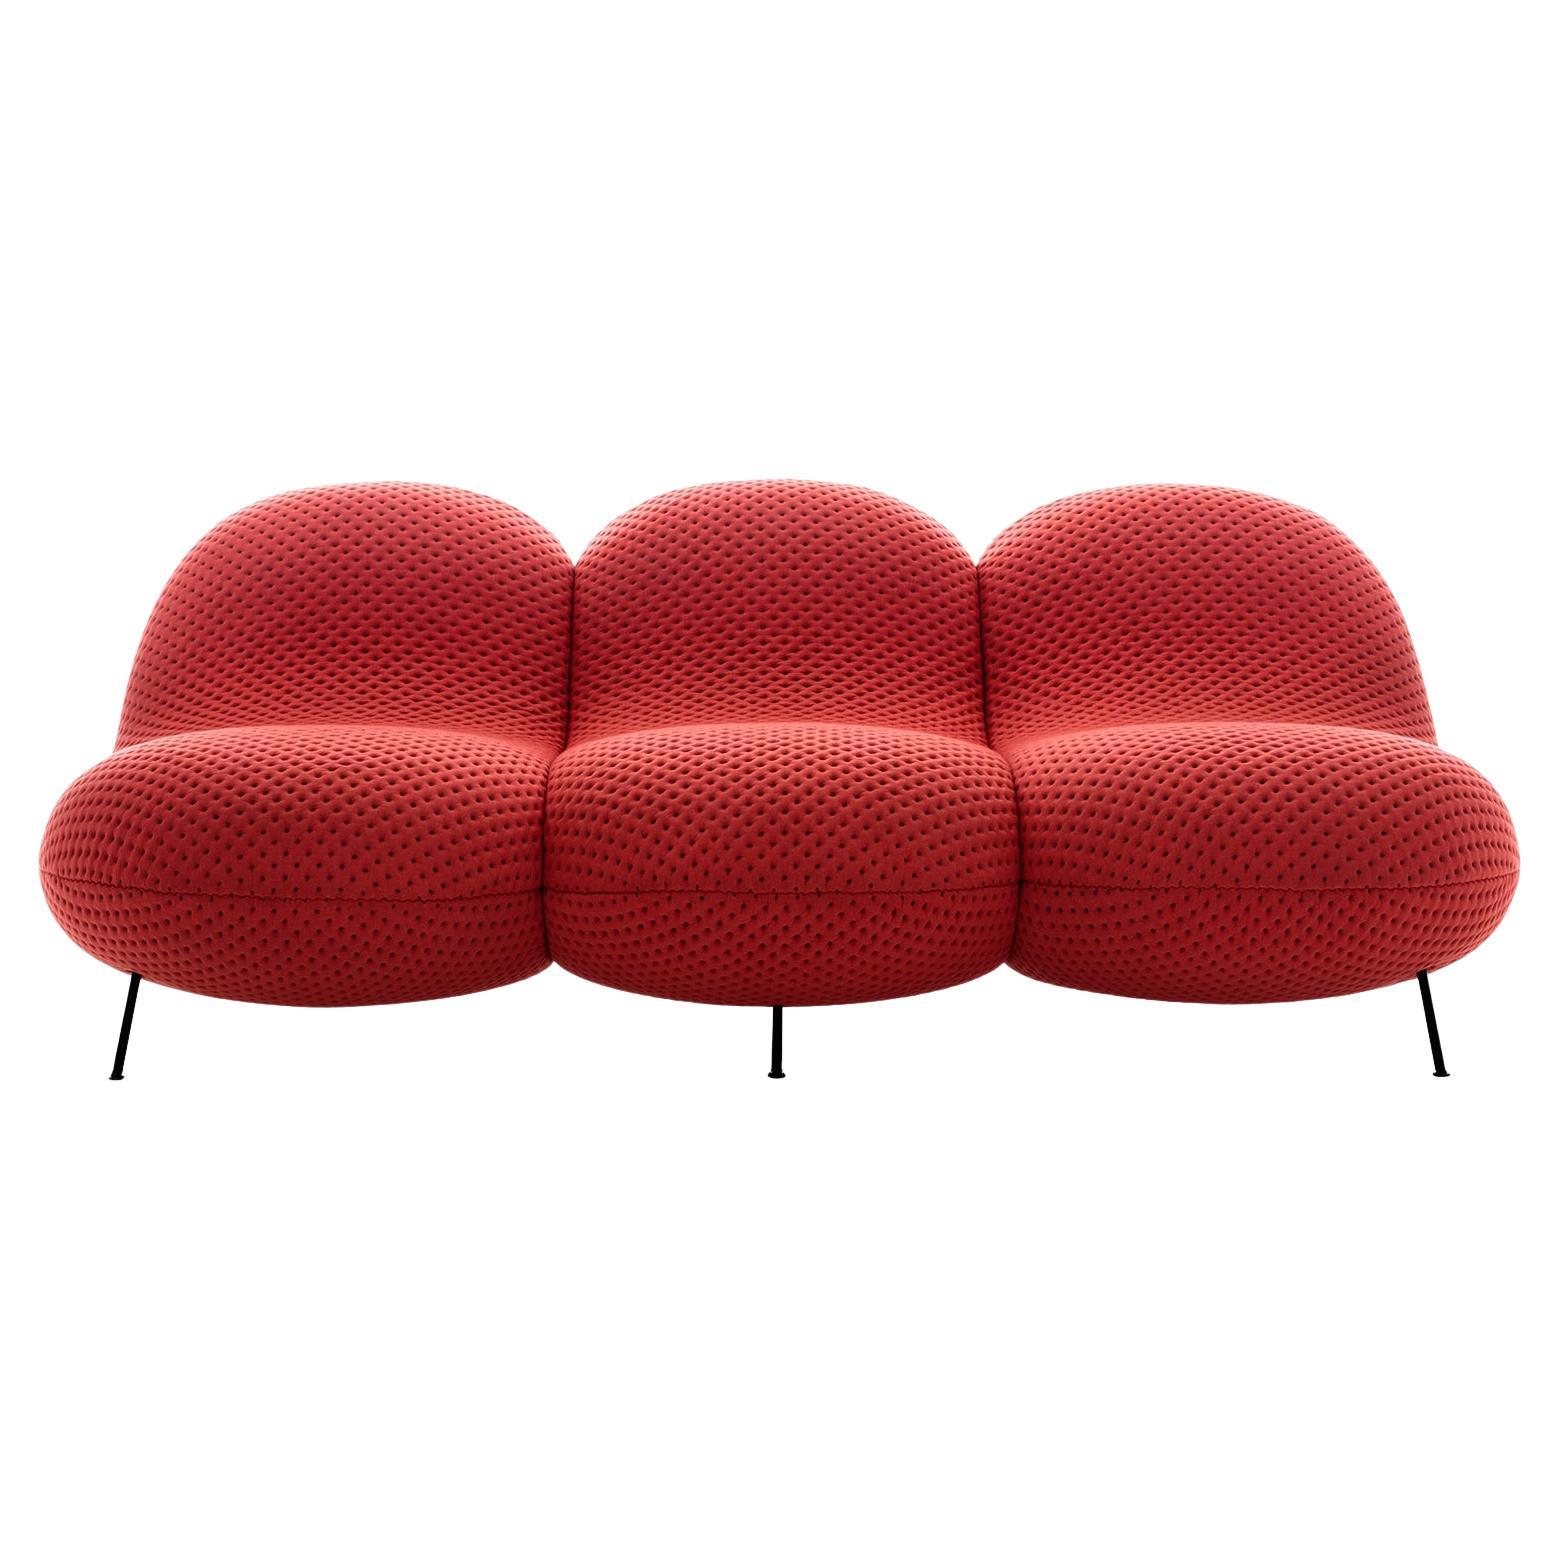 Baba 3-Seater Sofa in Stitch Rouge by Febrik For Sale